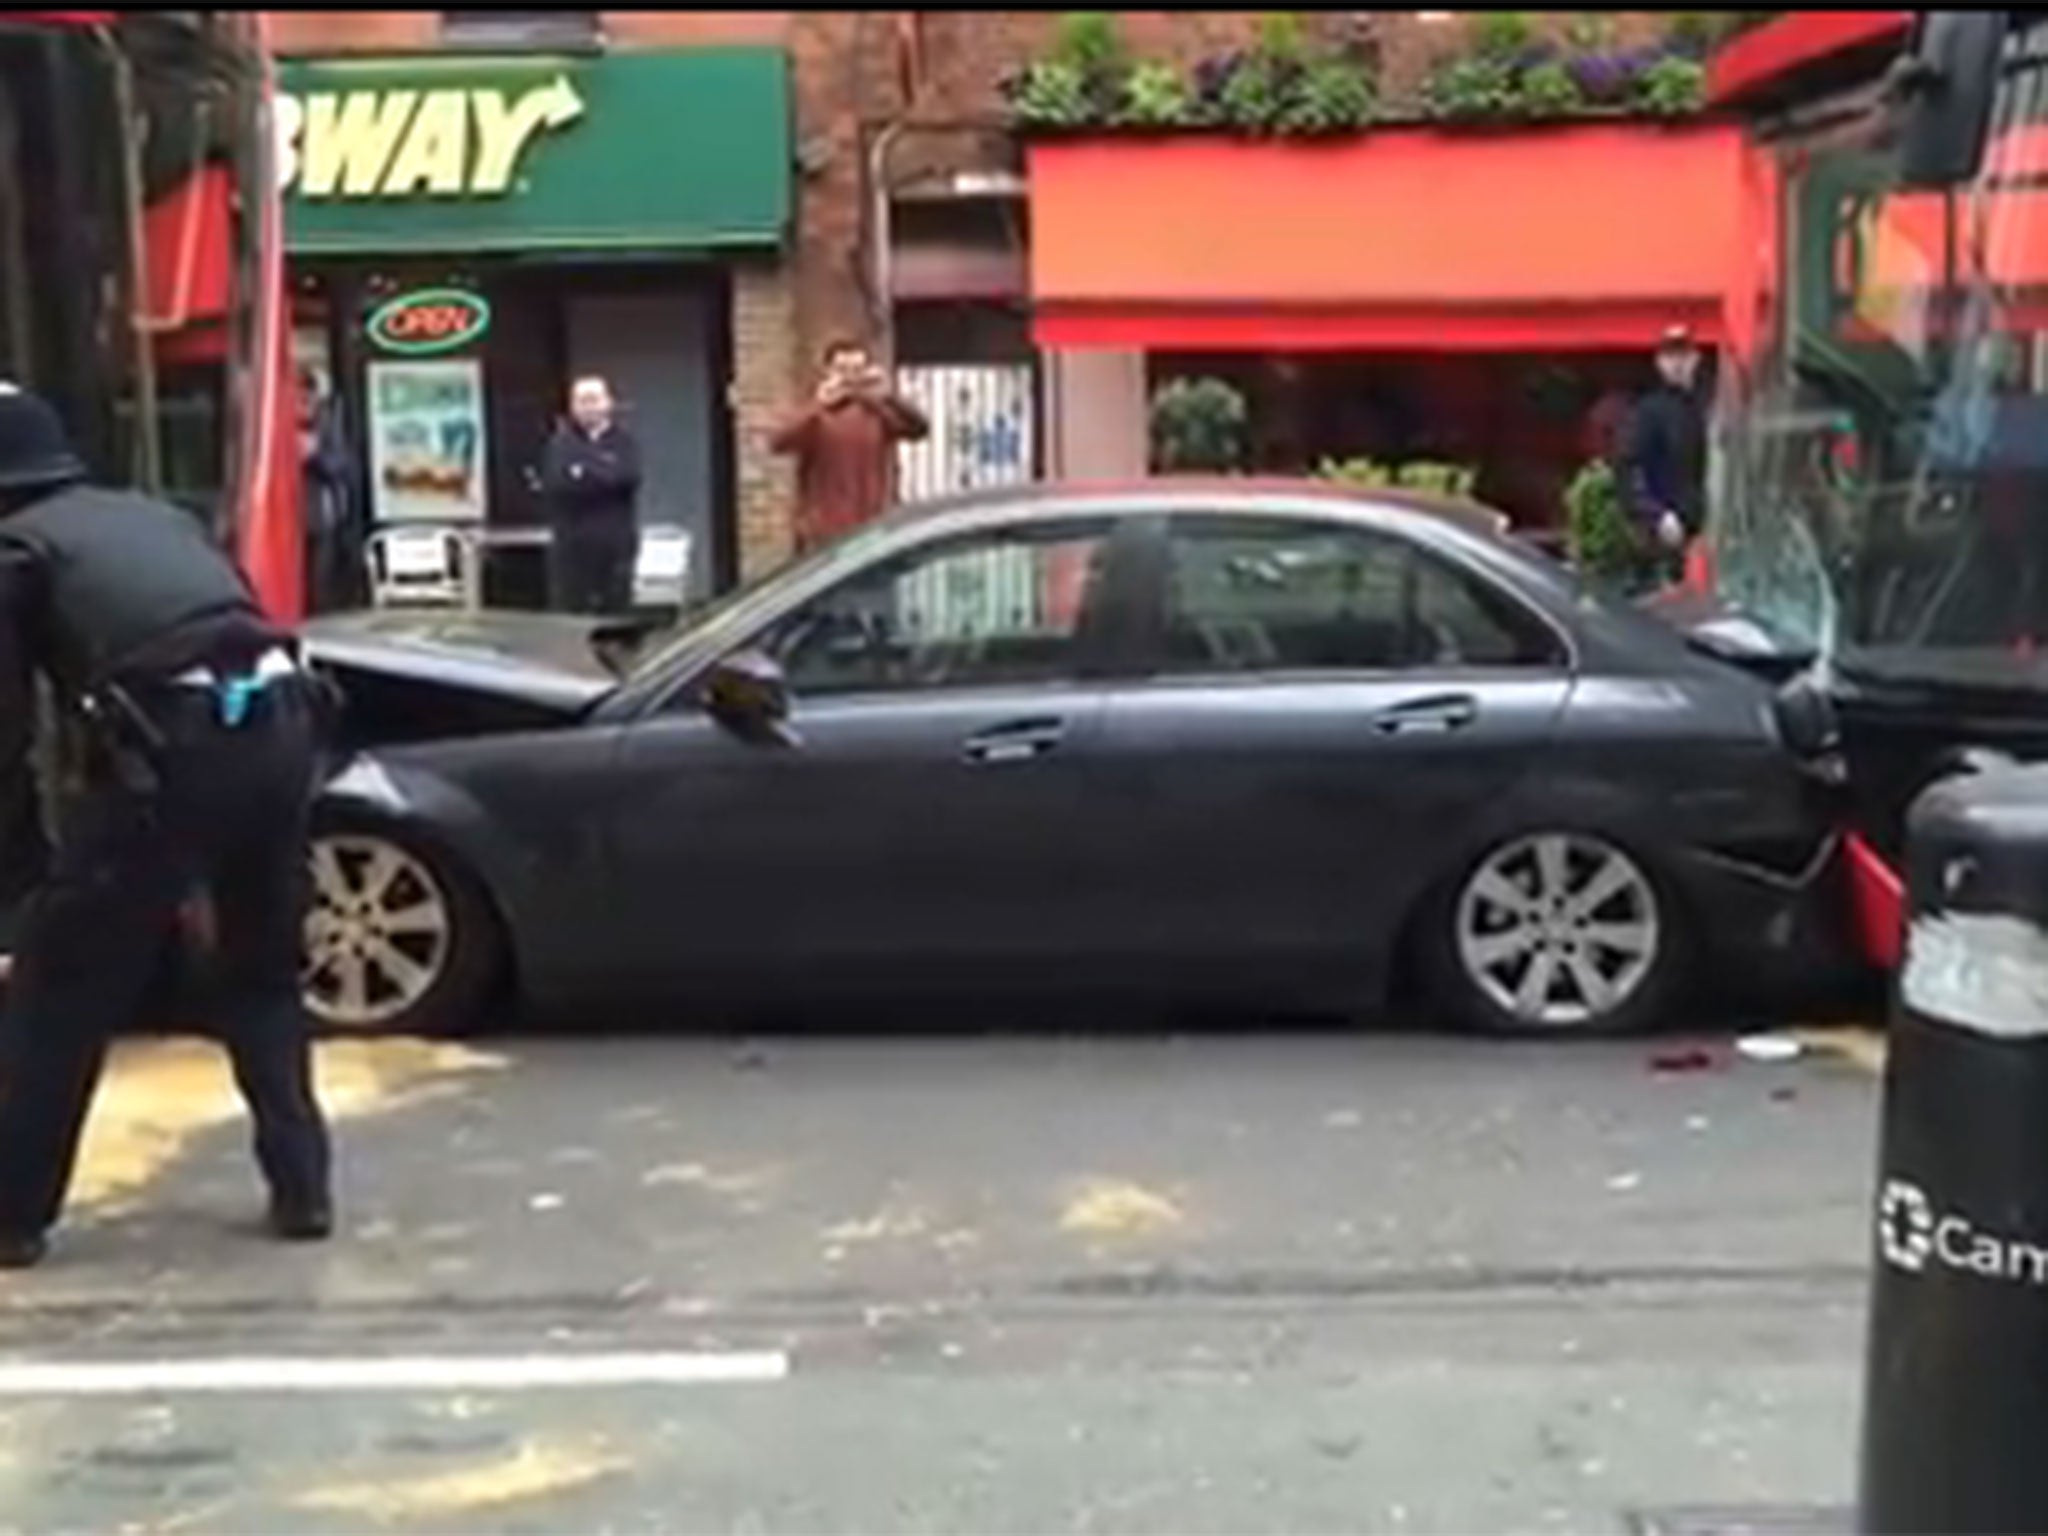 The Mercedes became trapped after an accident involving four cars on Sunday morning